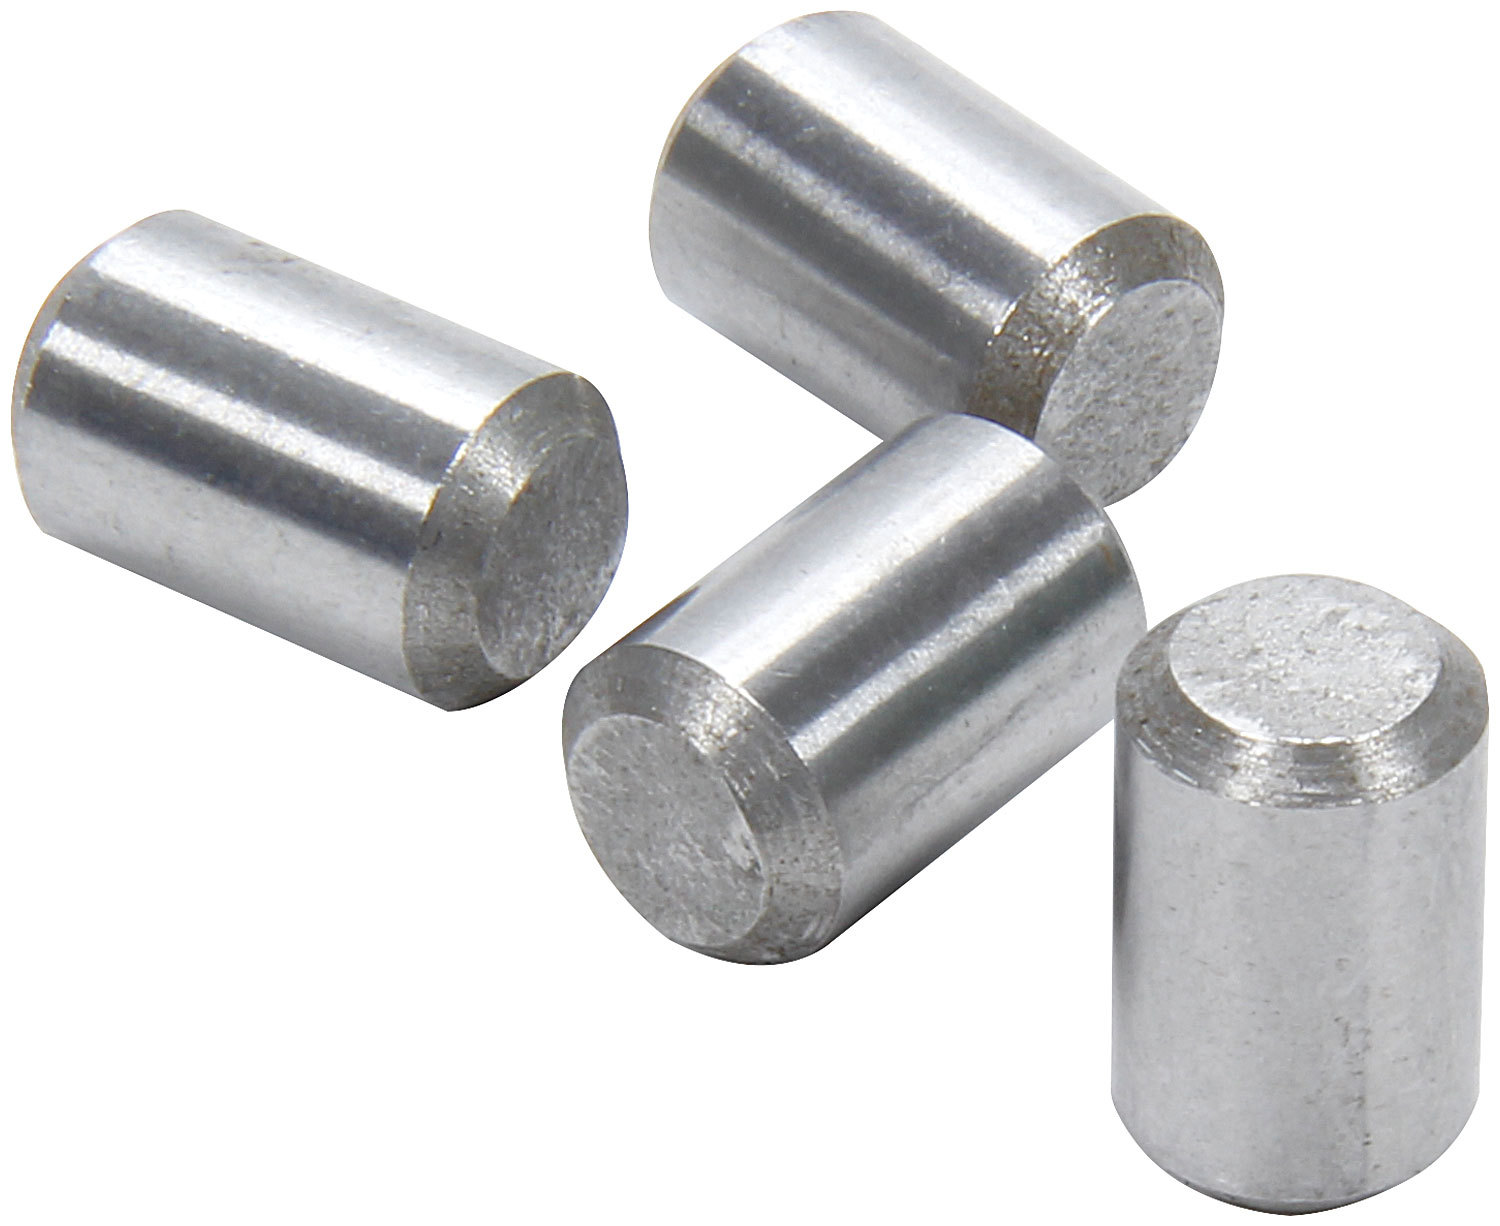 Allstar Performance 87020 Cylinder Head Dowels, Steel, Natural, Small Block Chevy, Set of 4